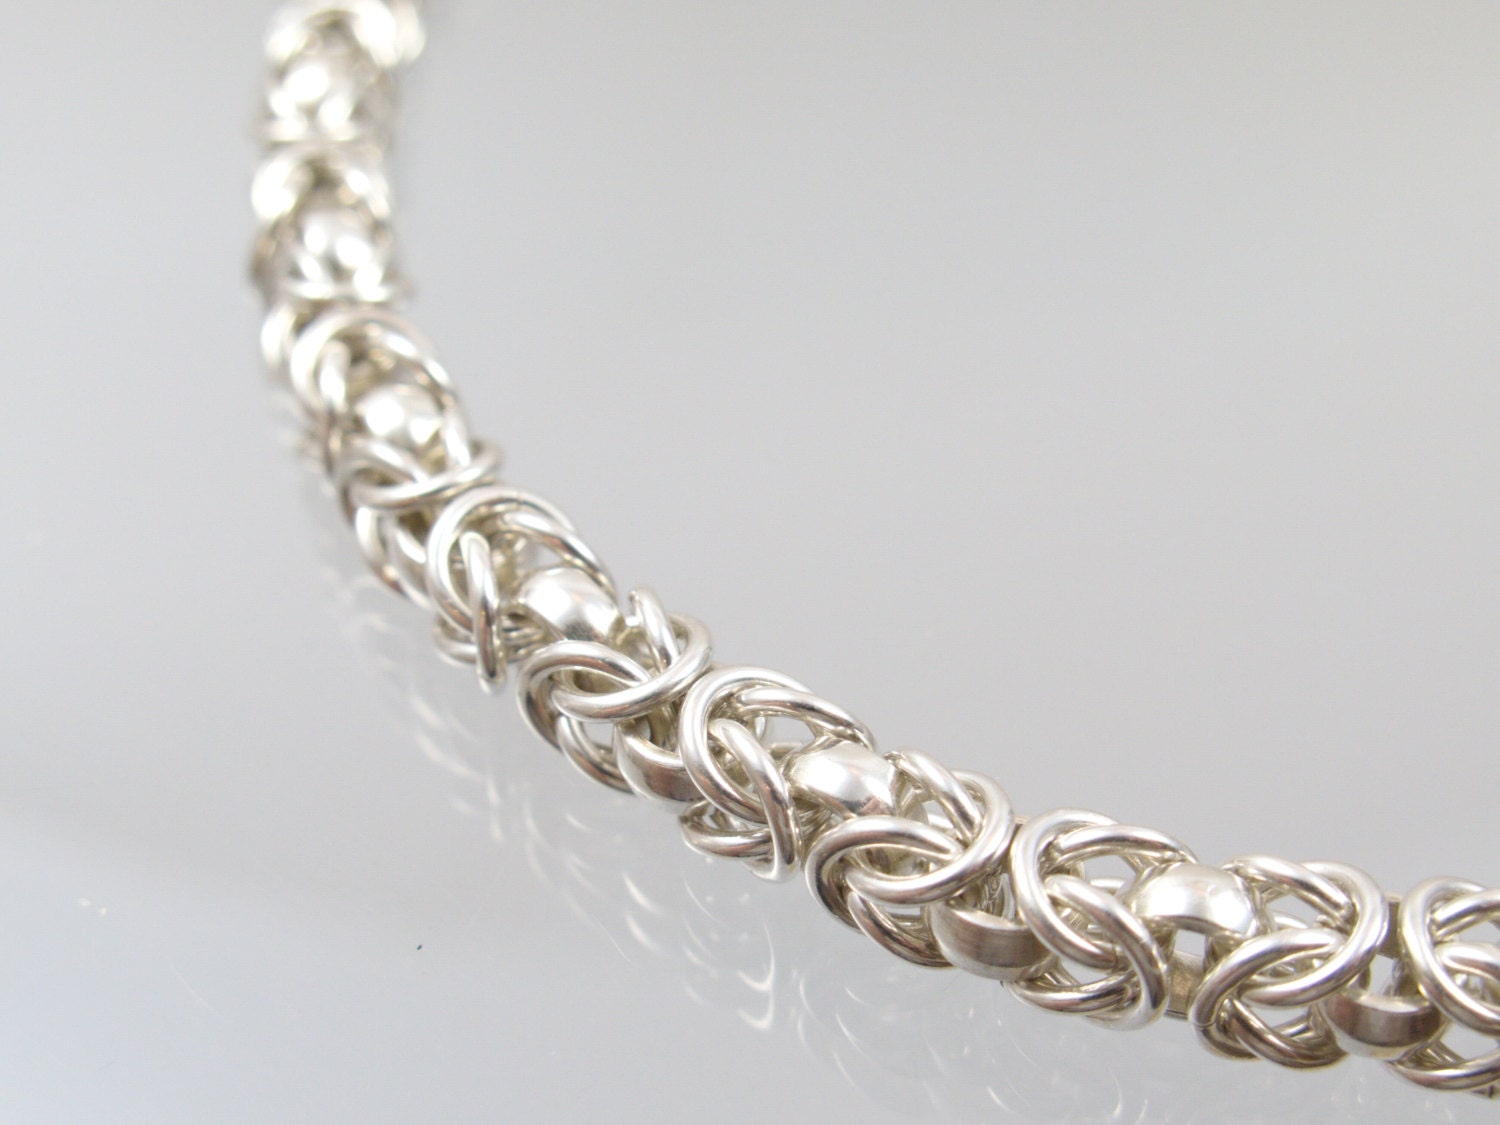 King Chain 63 G 925 / Sterling Silver Handmade Solid Handmade Unique  Goldsmith - Etsy